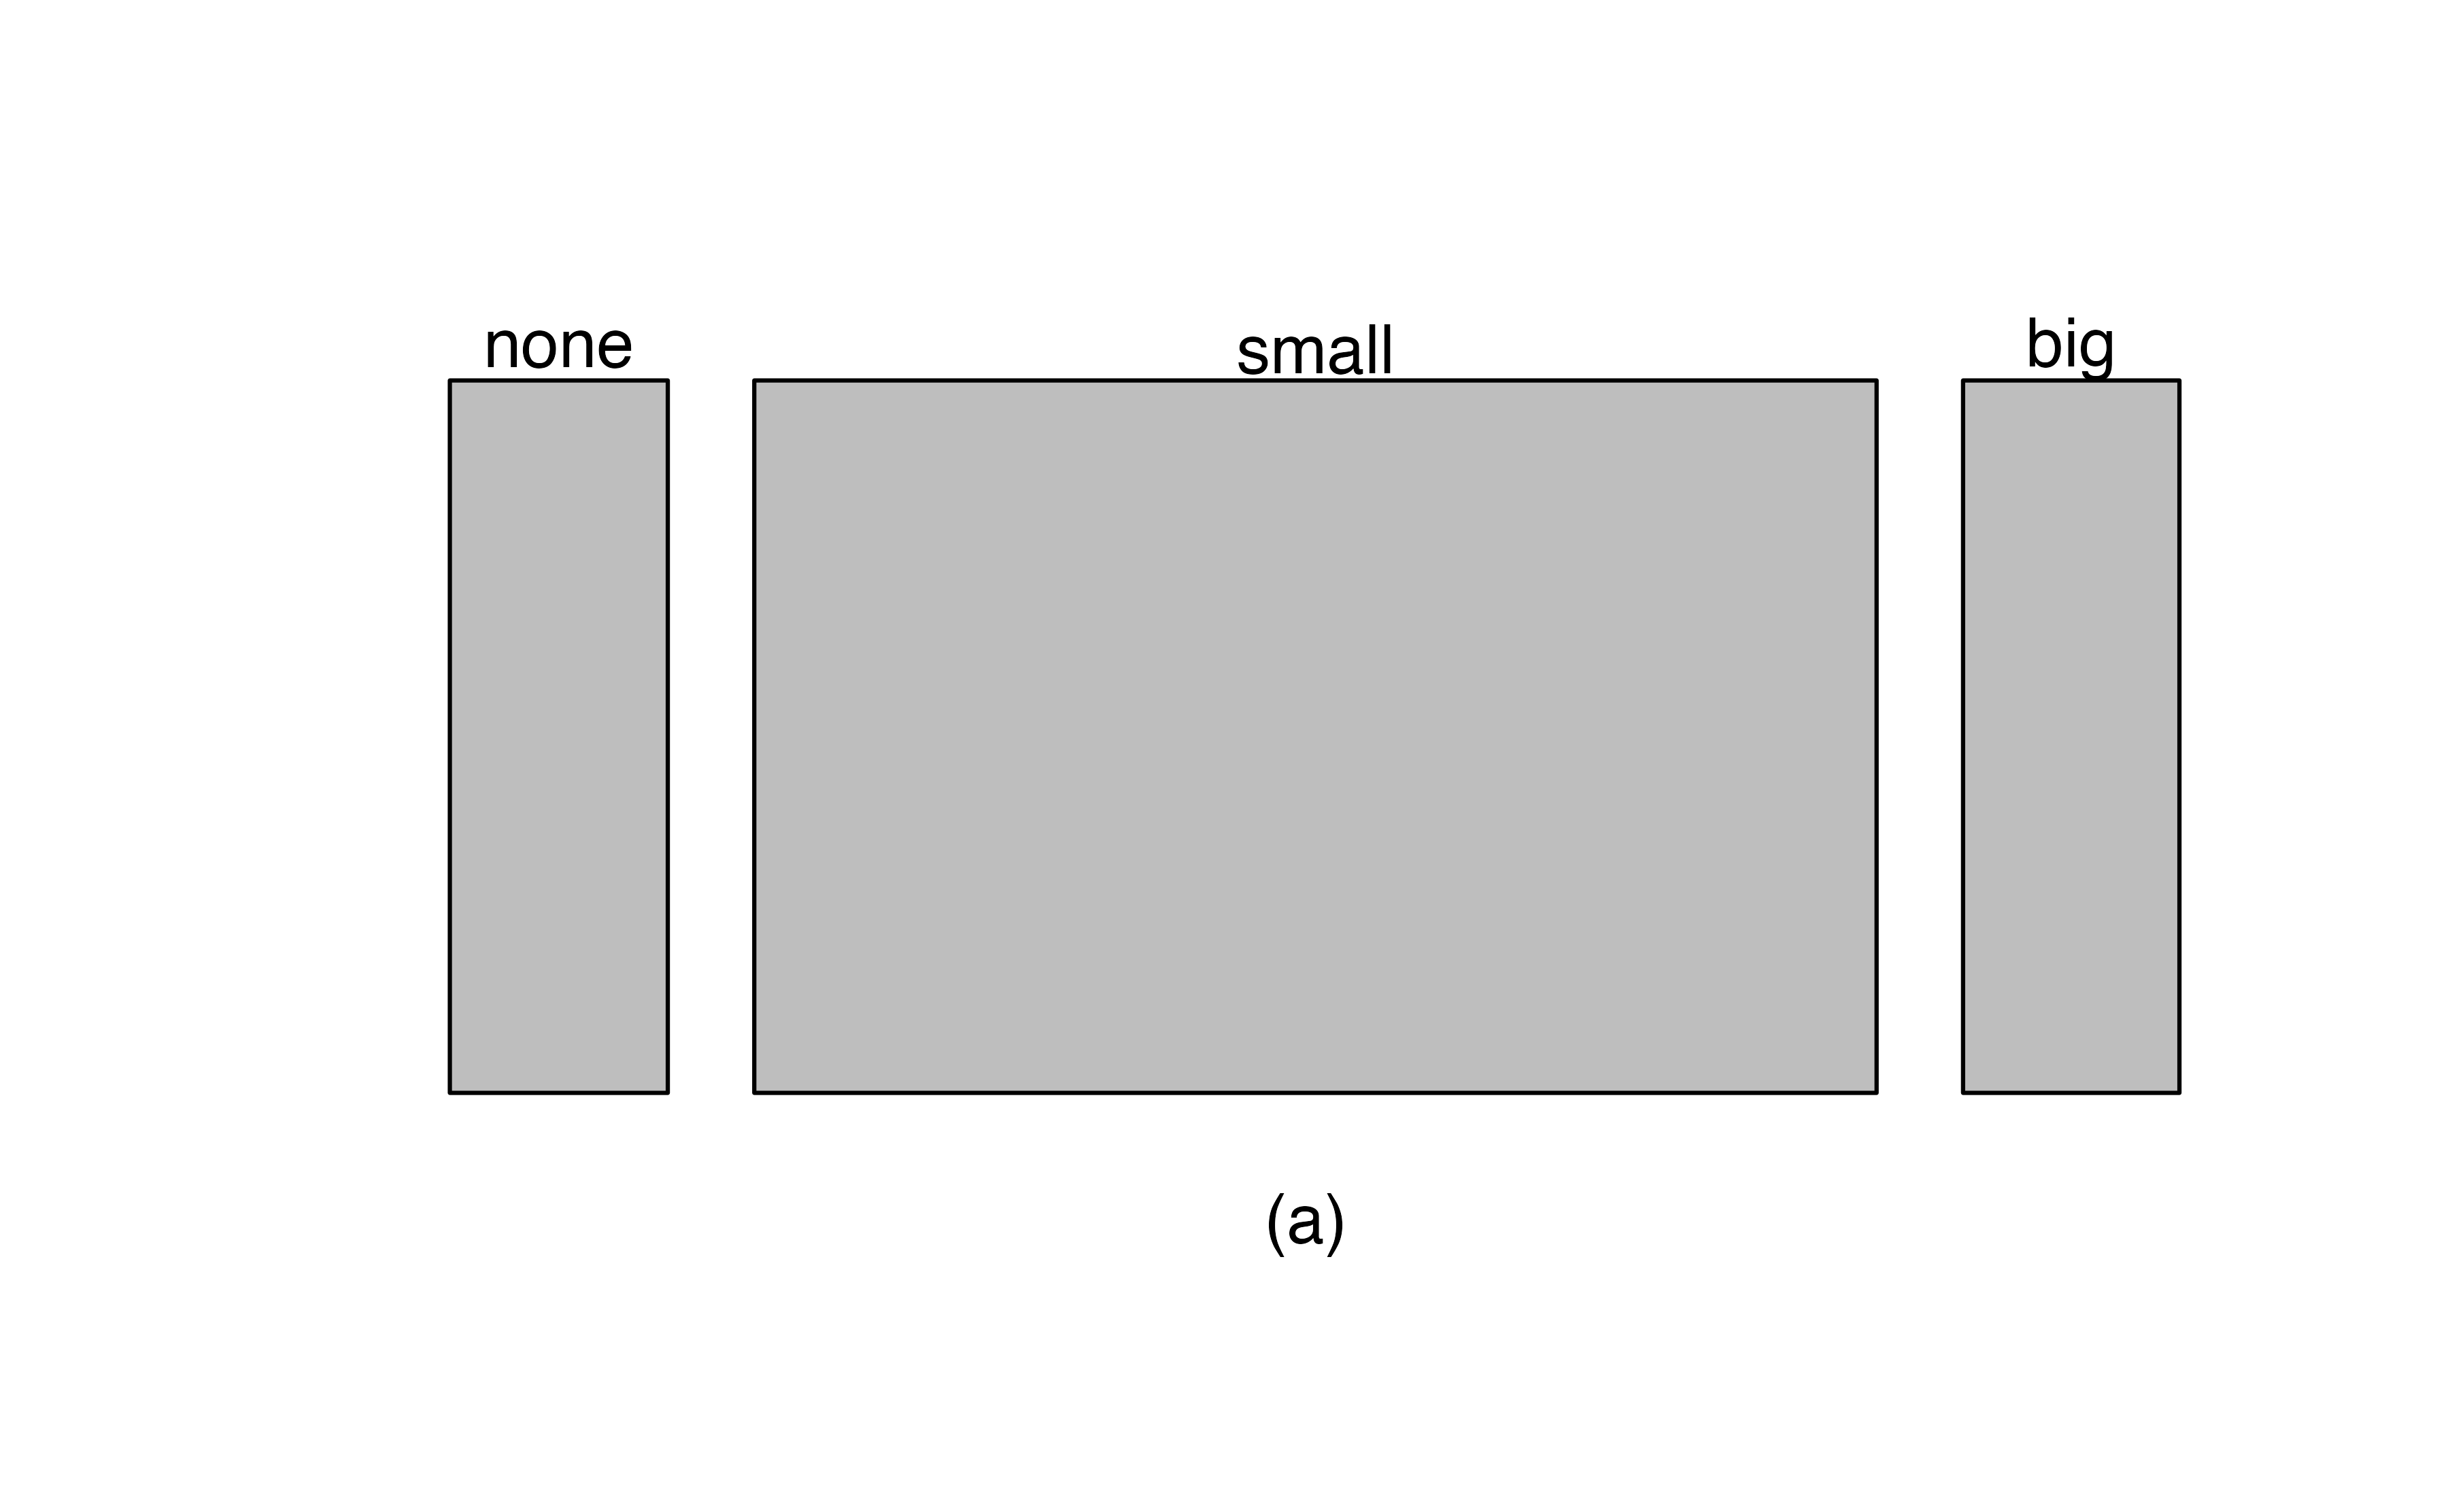 (a) Mosaic plot for numbers found in emails. (b) Mosaic plot where the `number` counts have been further broken down by `type`.